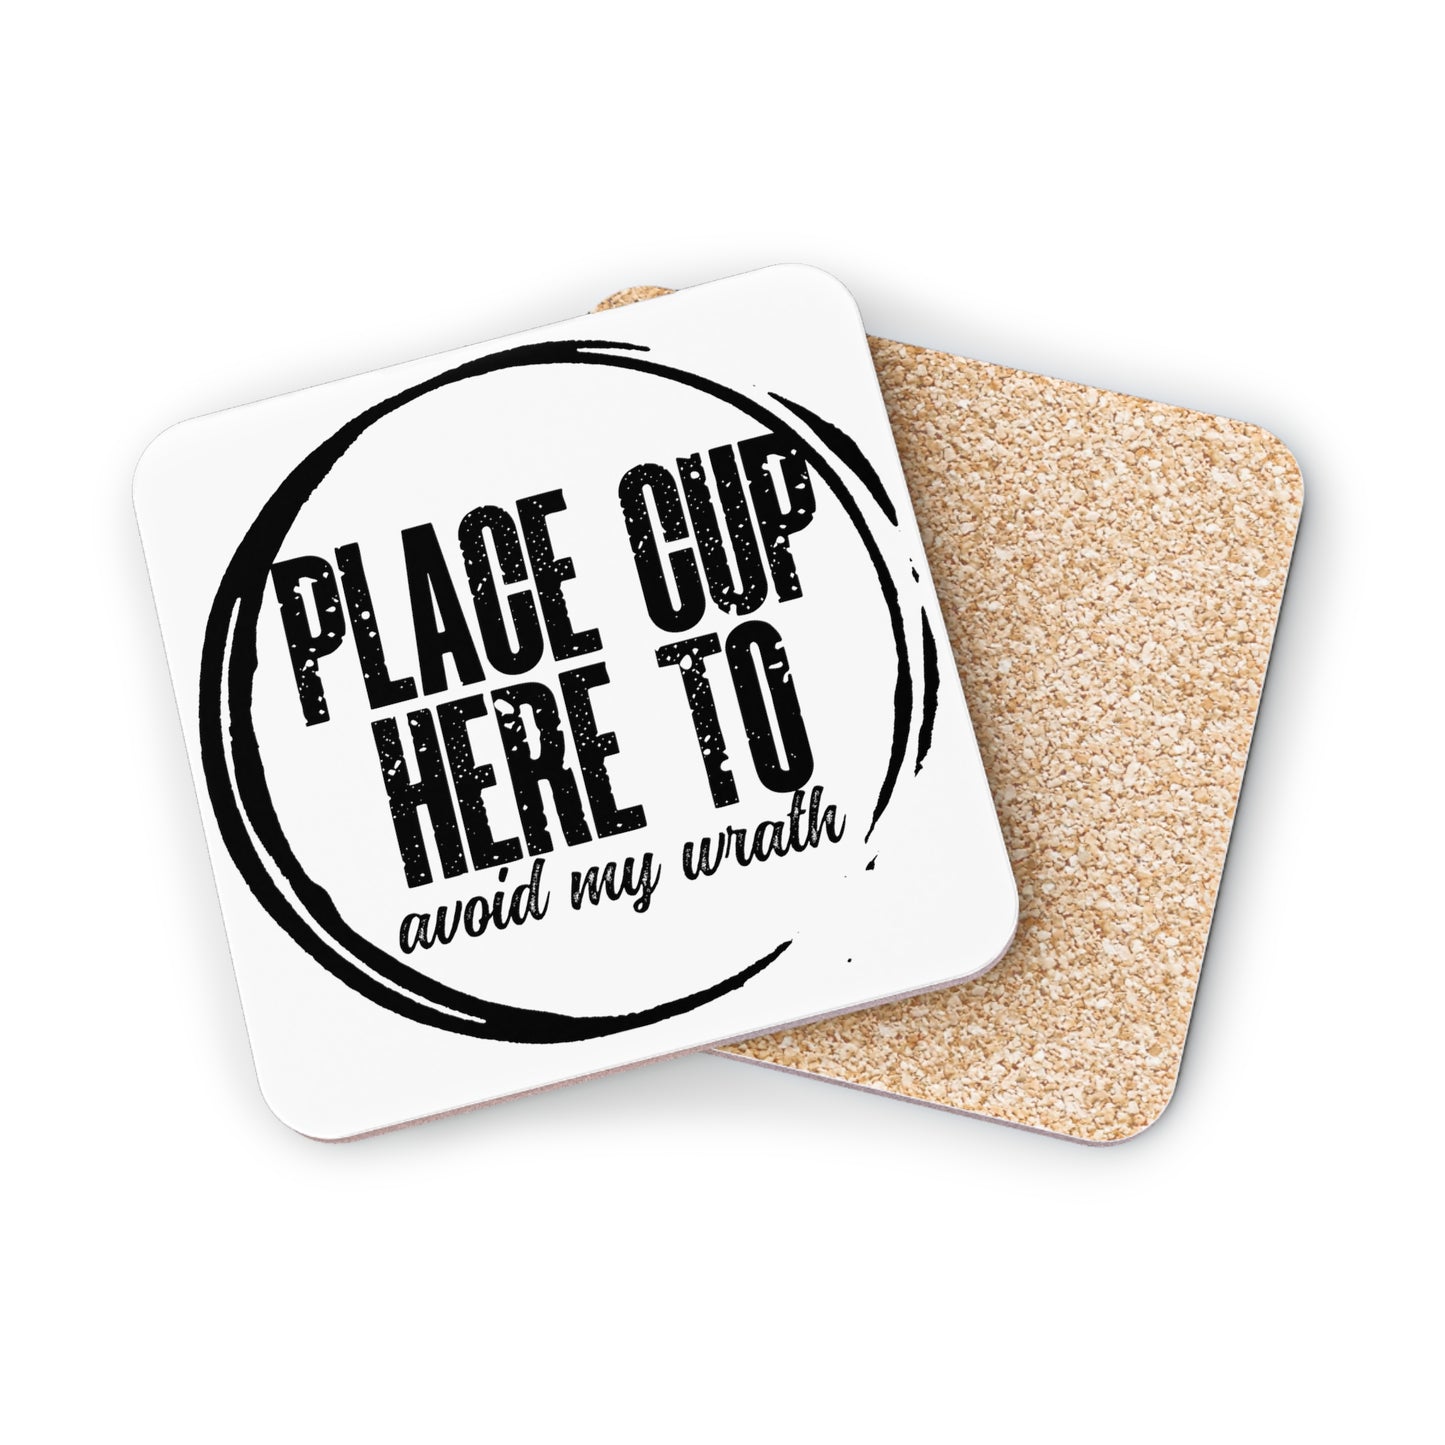 "Place Cup Here To Avoid My Wrath" Square Coasters